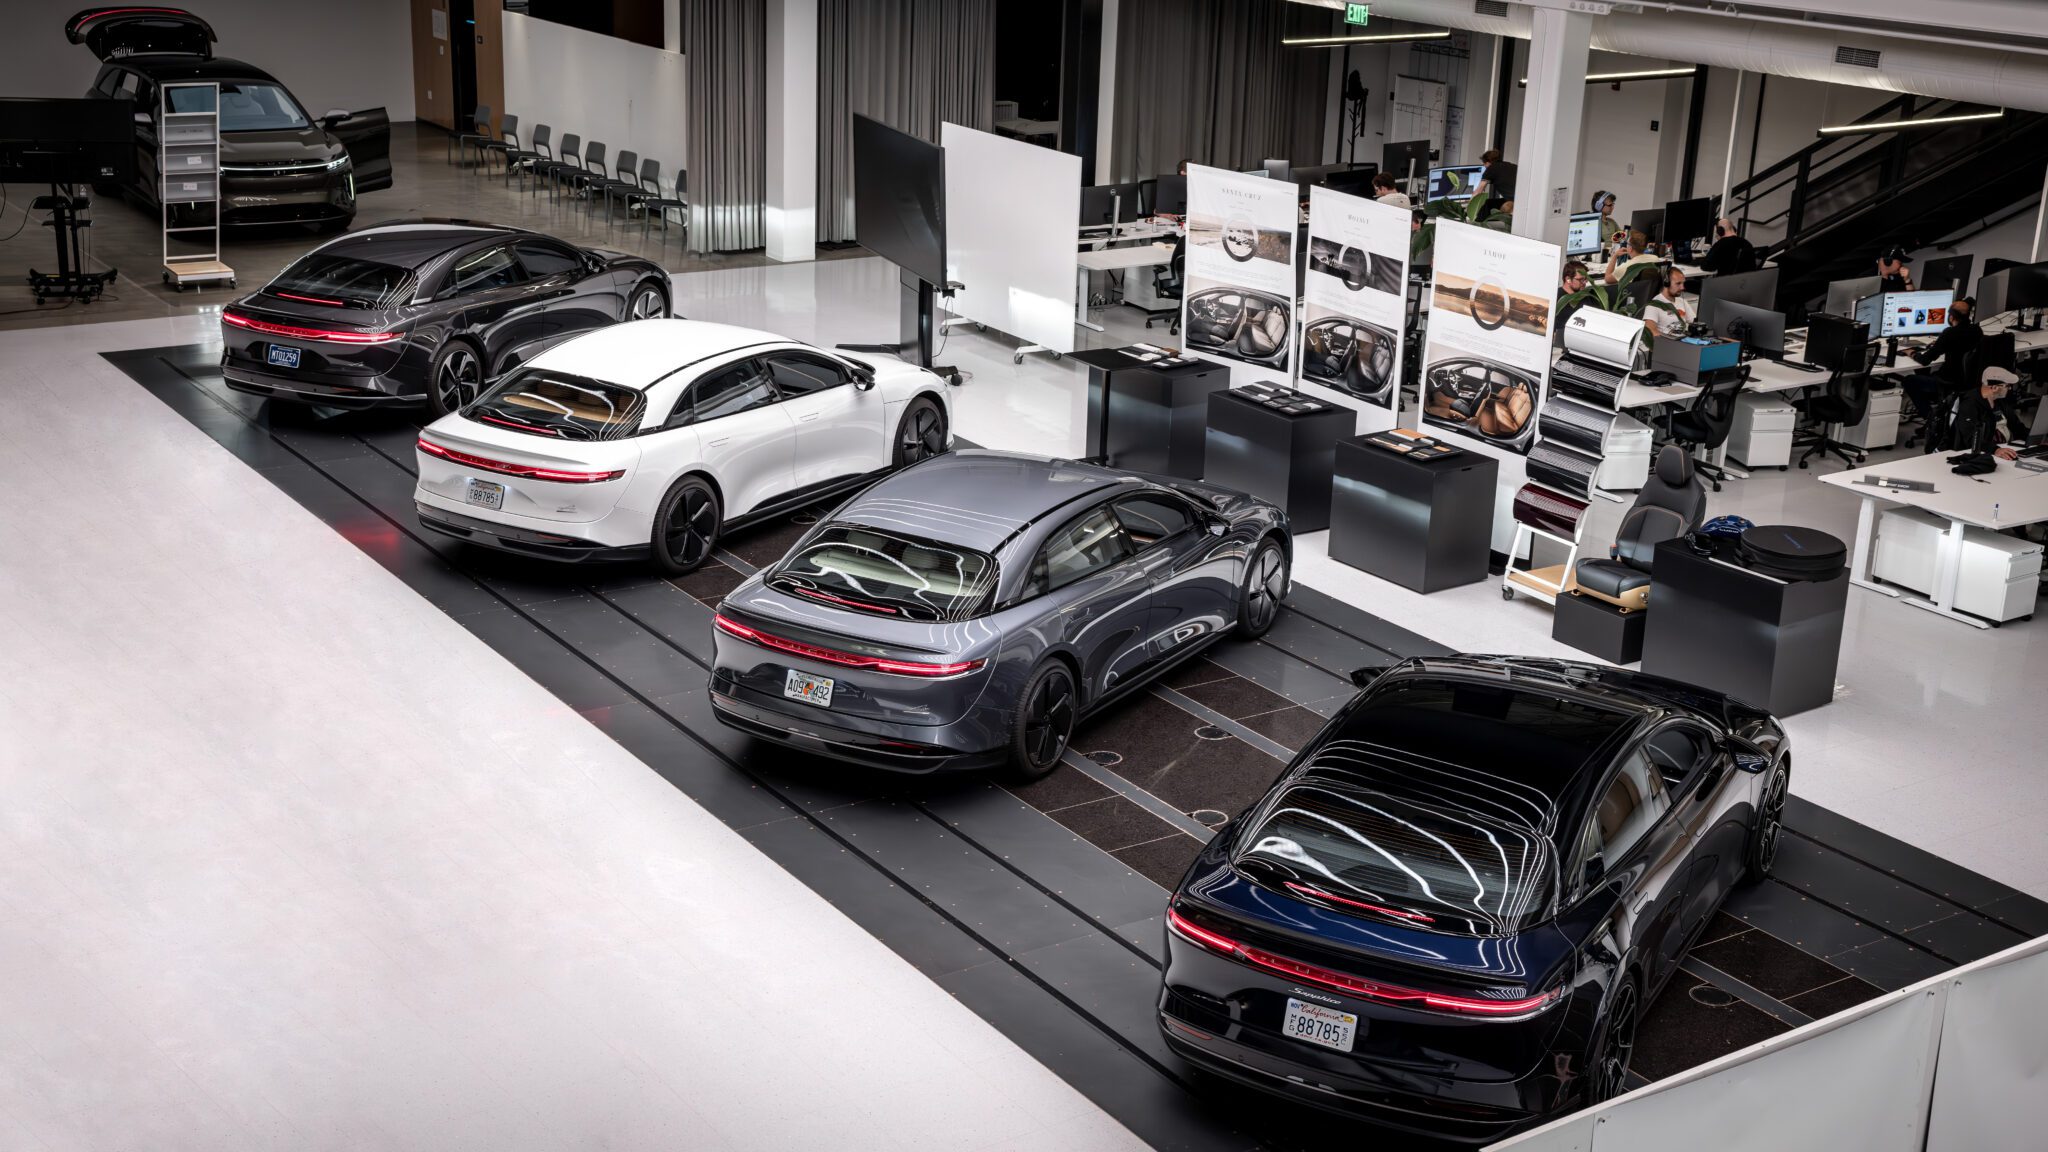 An image containing four cars in a factory floor.